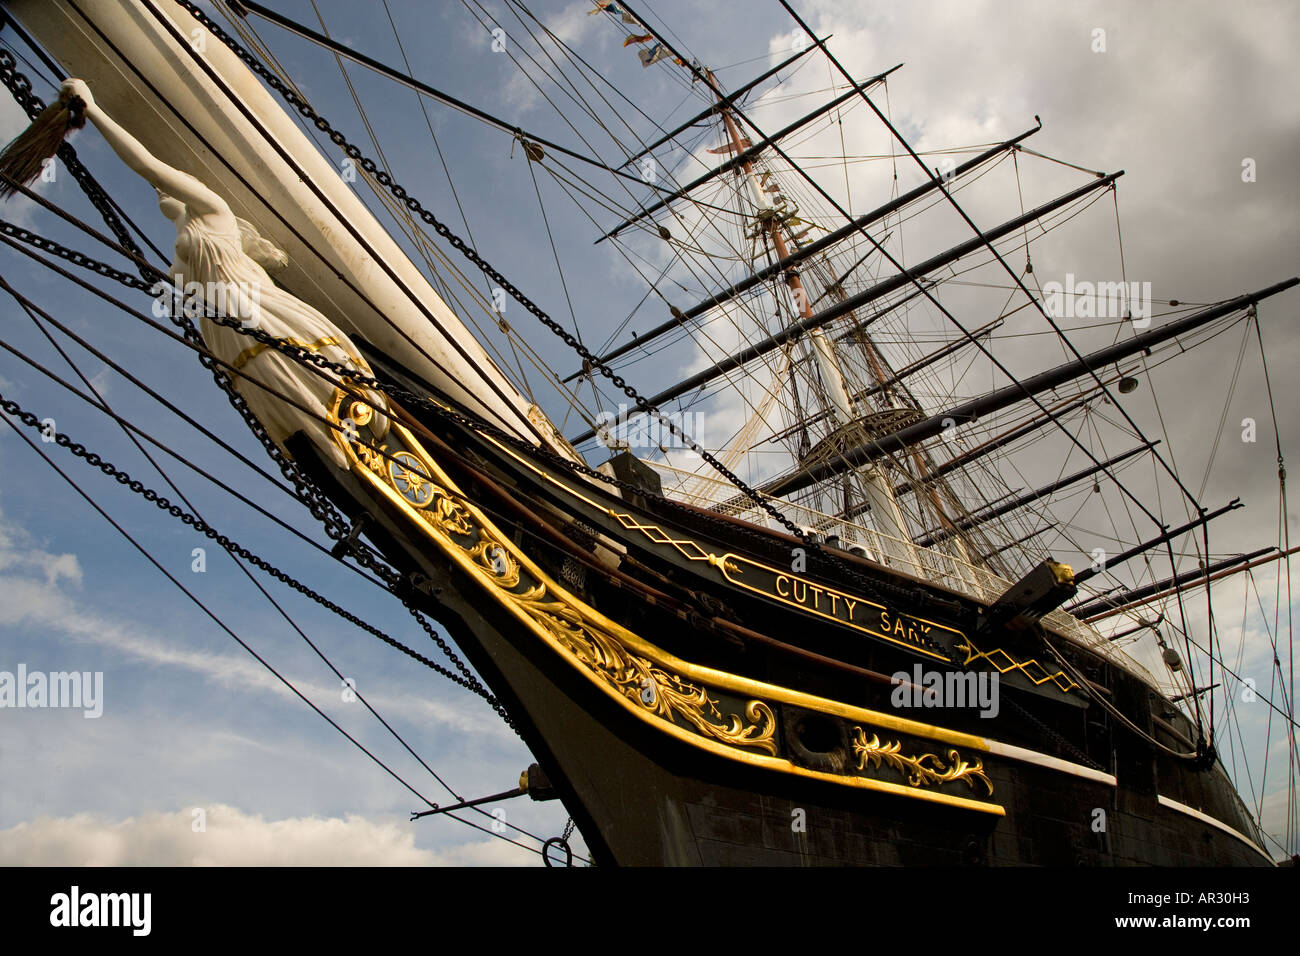 Cutty Sark Clipper Thé Greenwich London UK Banque D'Images